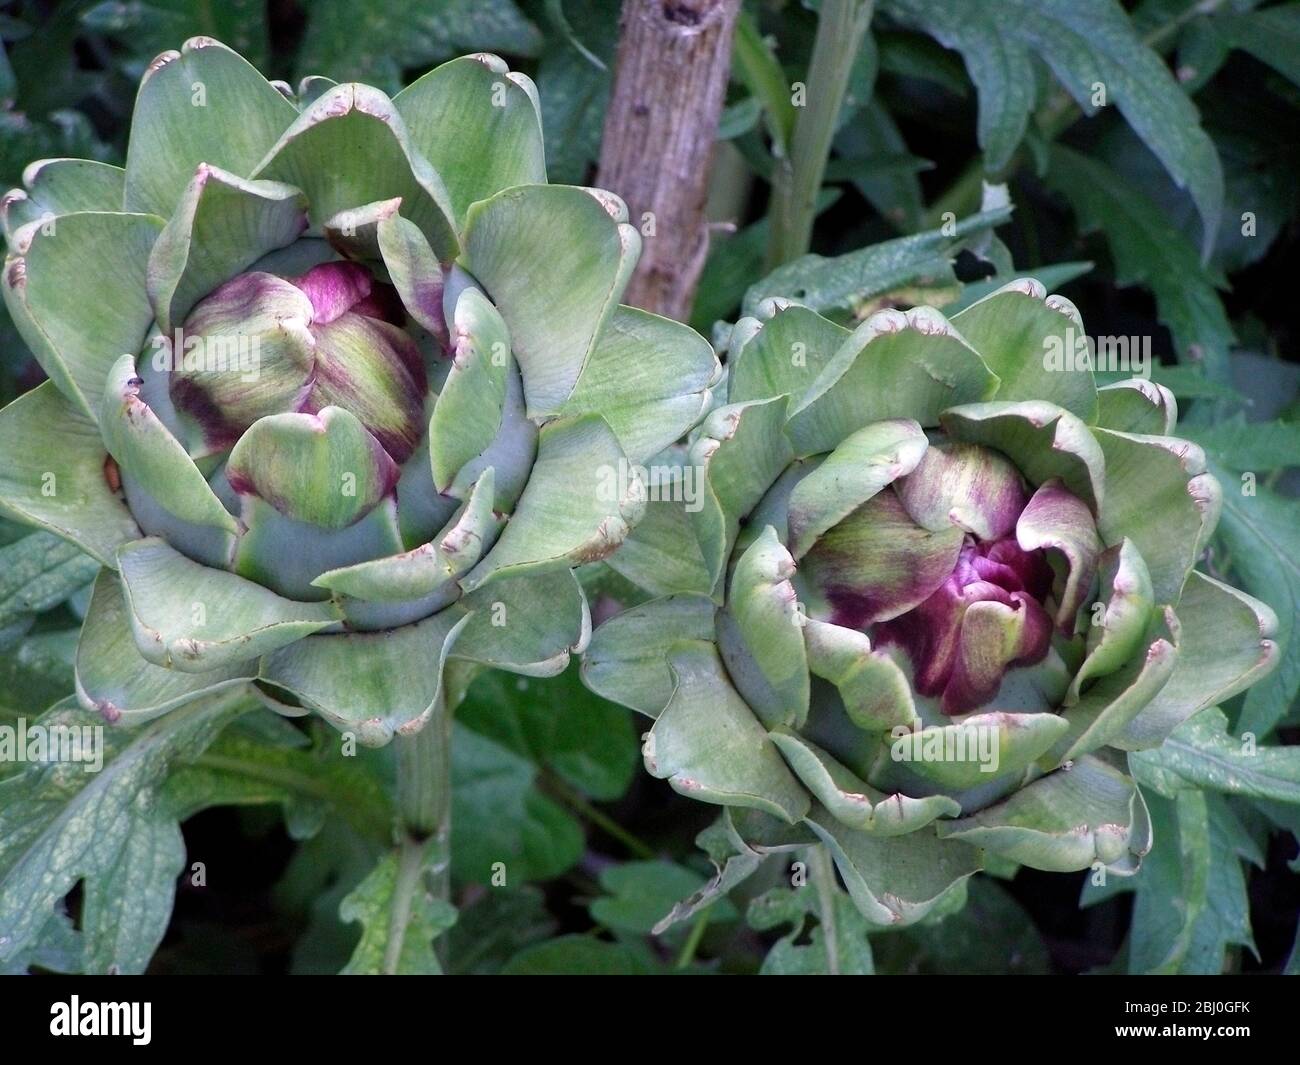 Globe artichoke growing. The Globe artichoke (Cynara scolymus) is a species of thistle. The edible part of the plant is the base (receptacle) of the a Stock Photo